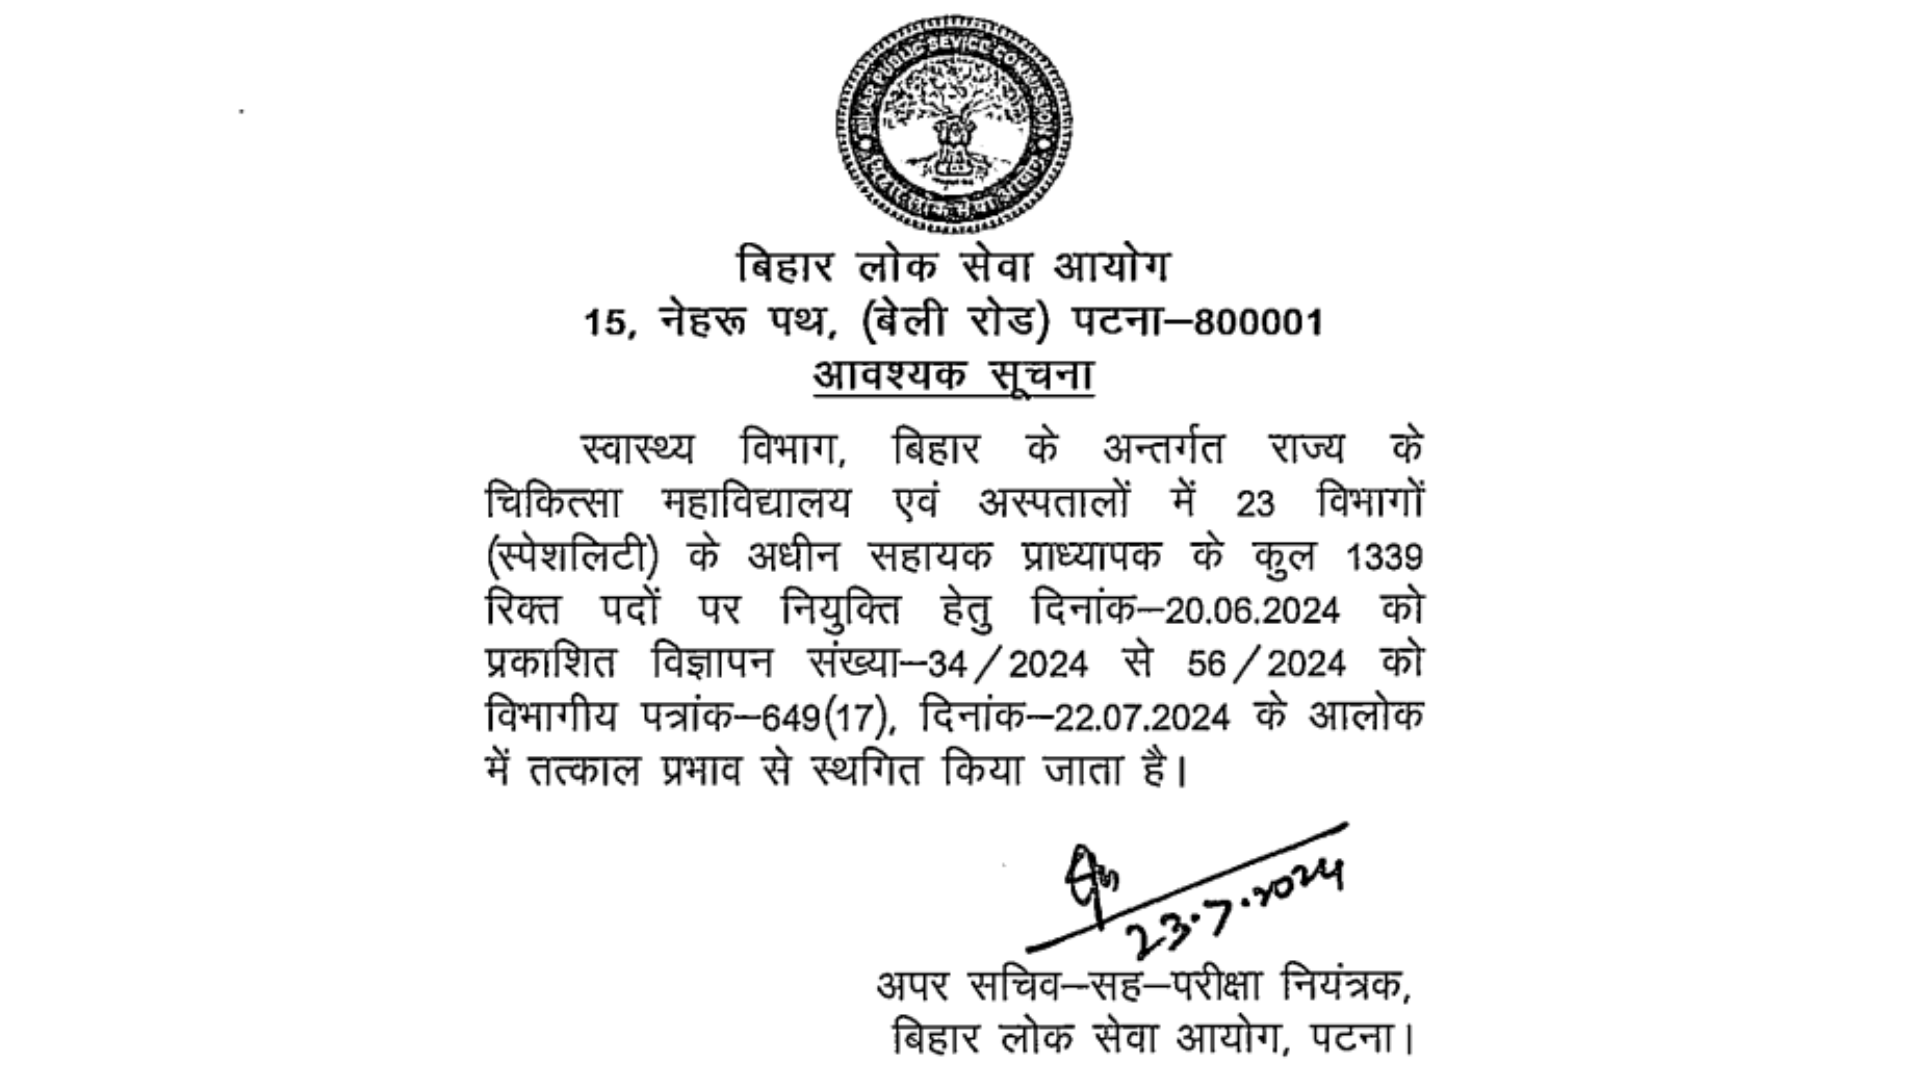 BPSC Assistant Professor Recruitment 2024 [1339 Post] Recruitment Cancelled, Notice Out